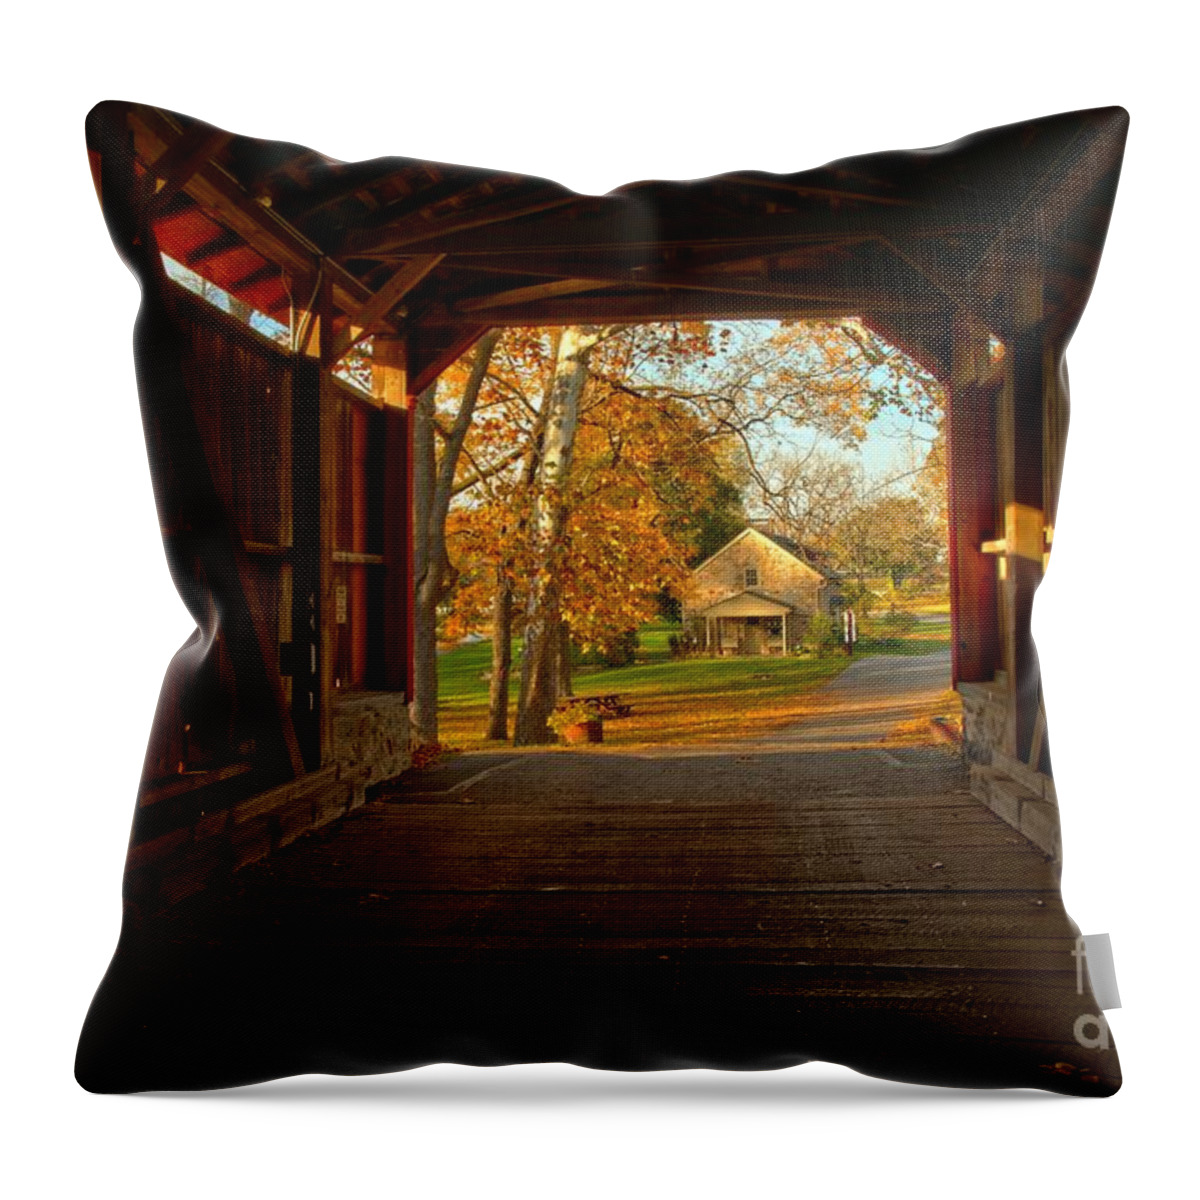 Poole Forge Covered Bridge Throw Pillow featuring the photograph Poole Forge Covered Bridge - Lancaster County PA by Adam Jewell